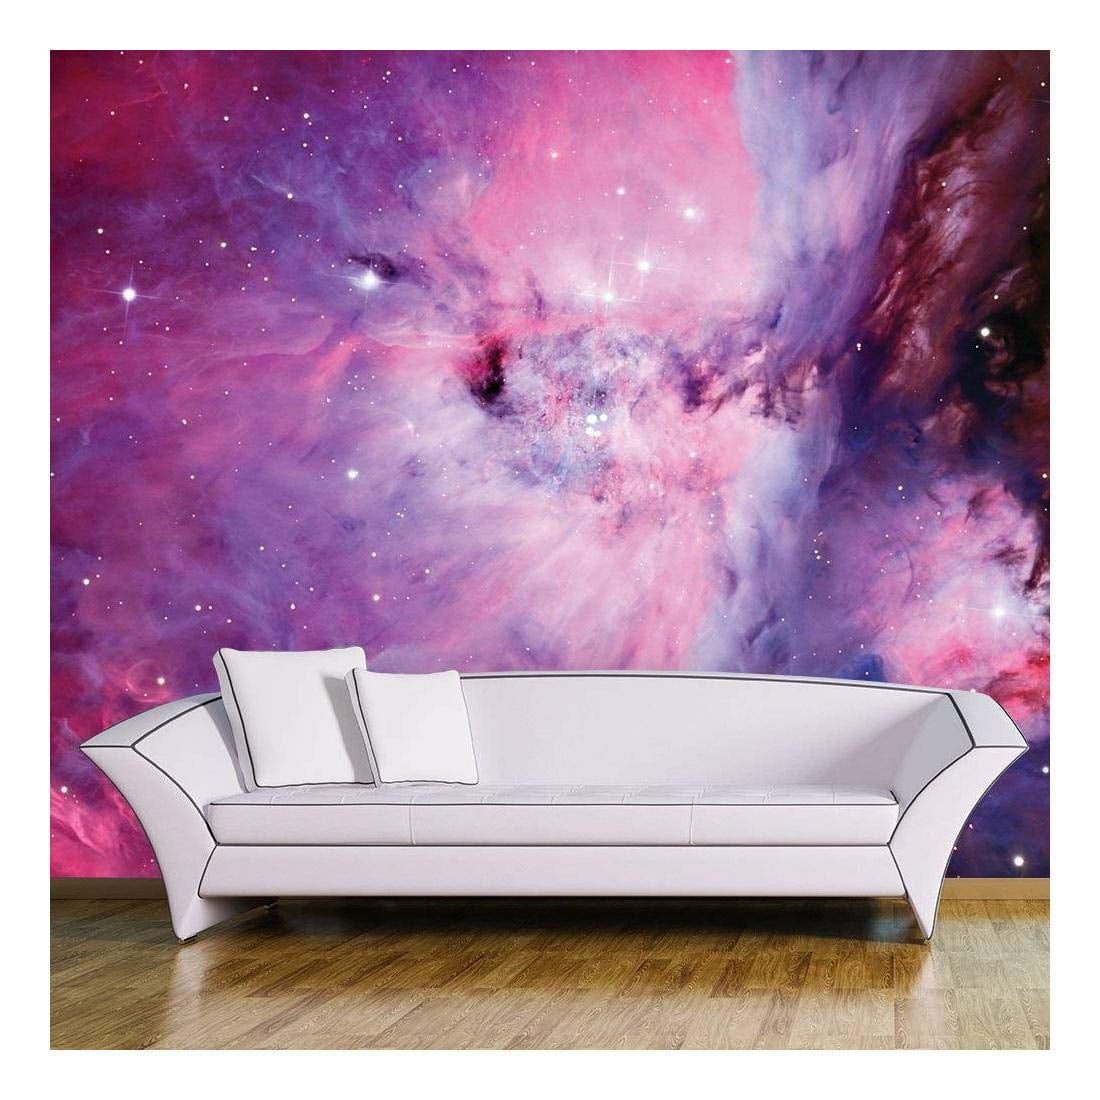 Home Decor Wall26 100x144 inches Beautiful Multicolored Galaxy Wall Mural Removable Sticker